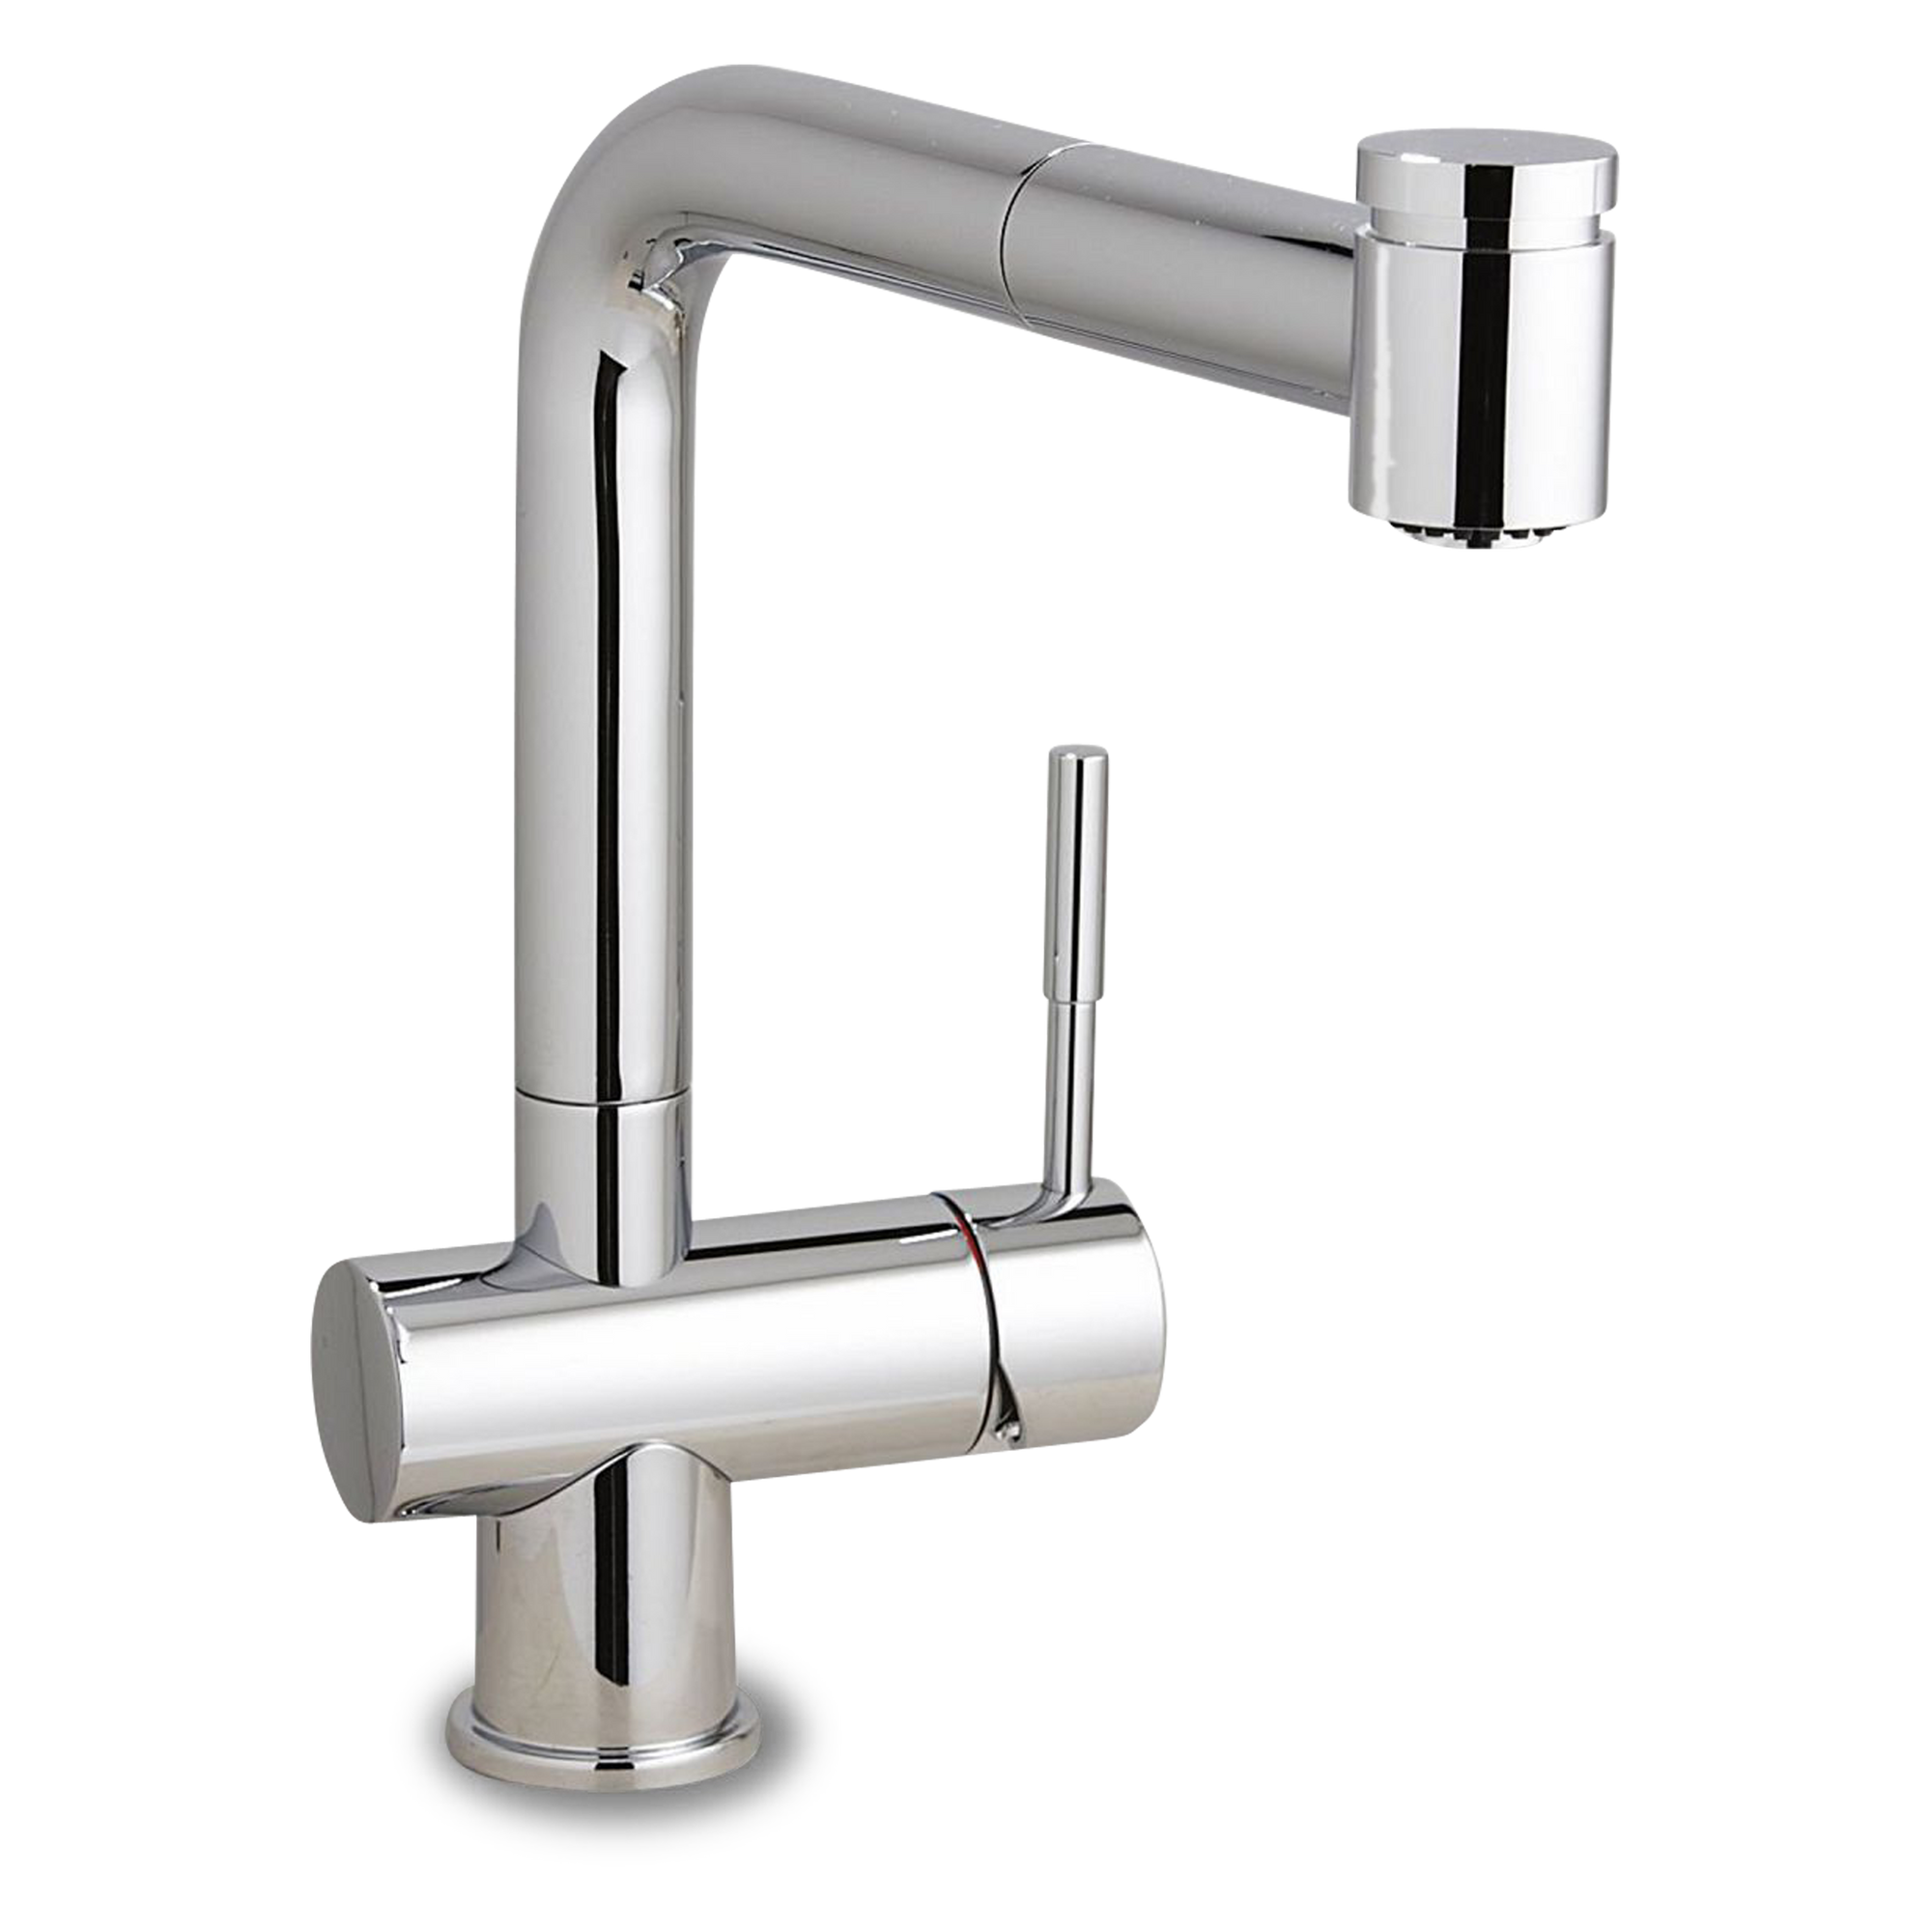 The Gessi Oxygene Faucet (Pull-Out) adds a modern touch to any kitchen with its seamless lines and curved cylindrical shape.